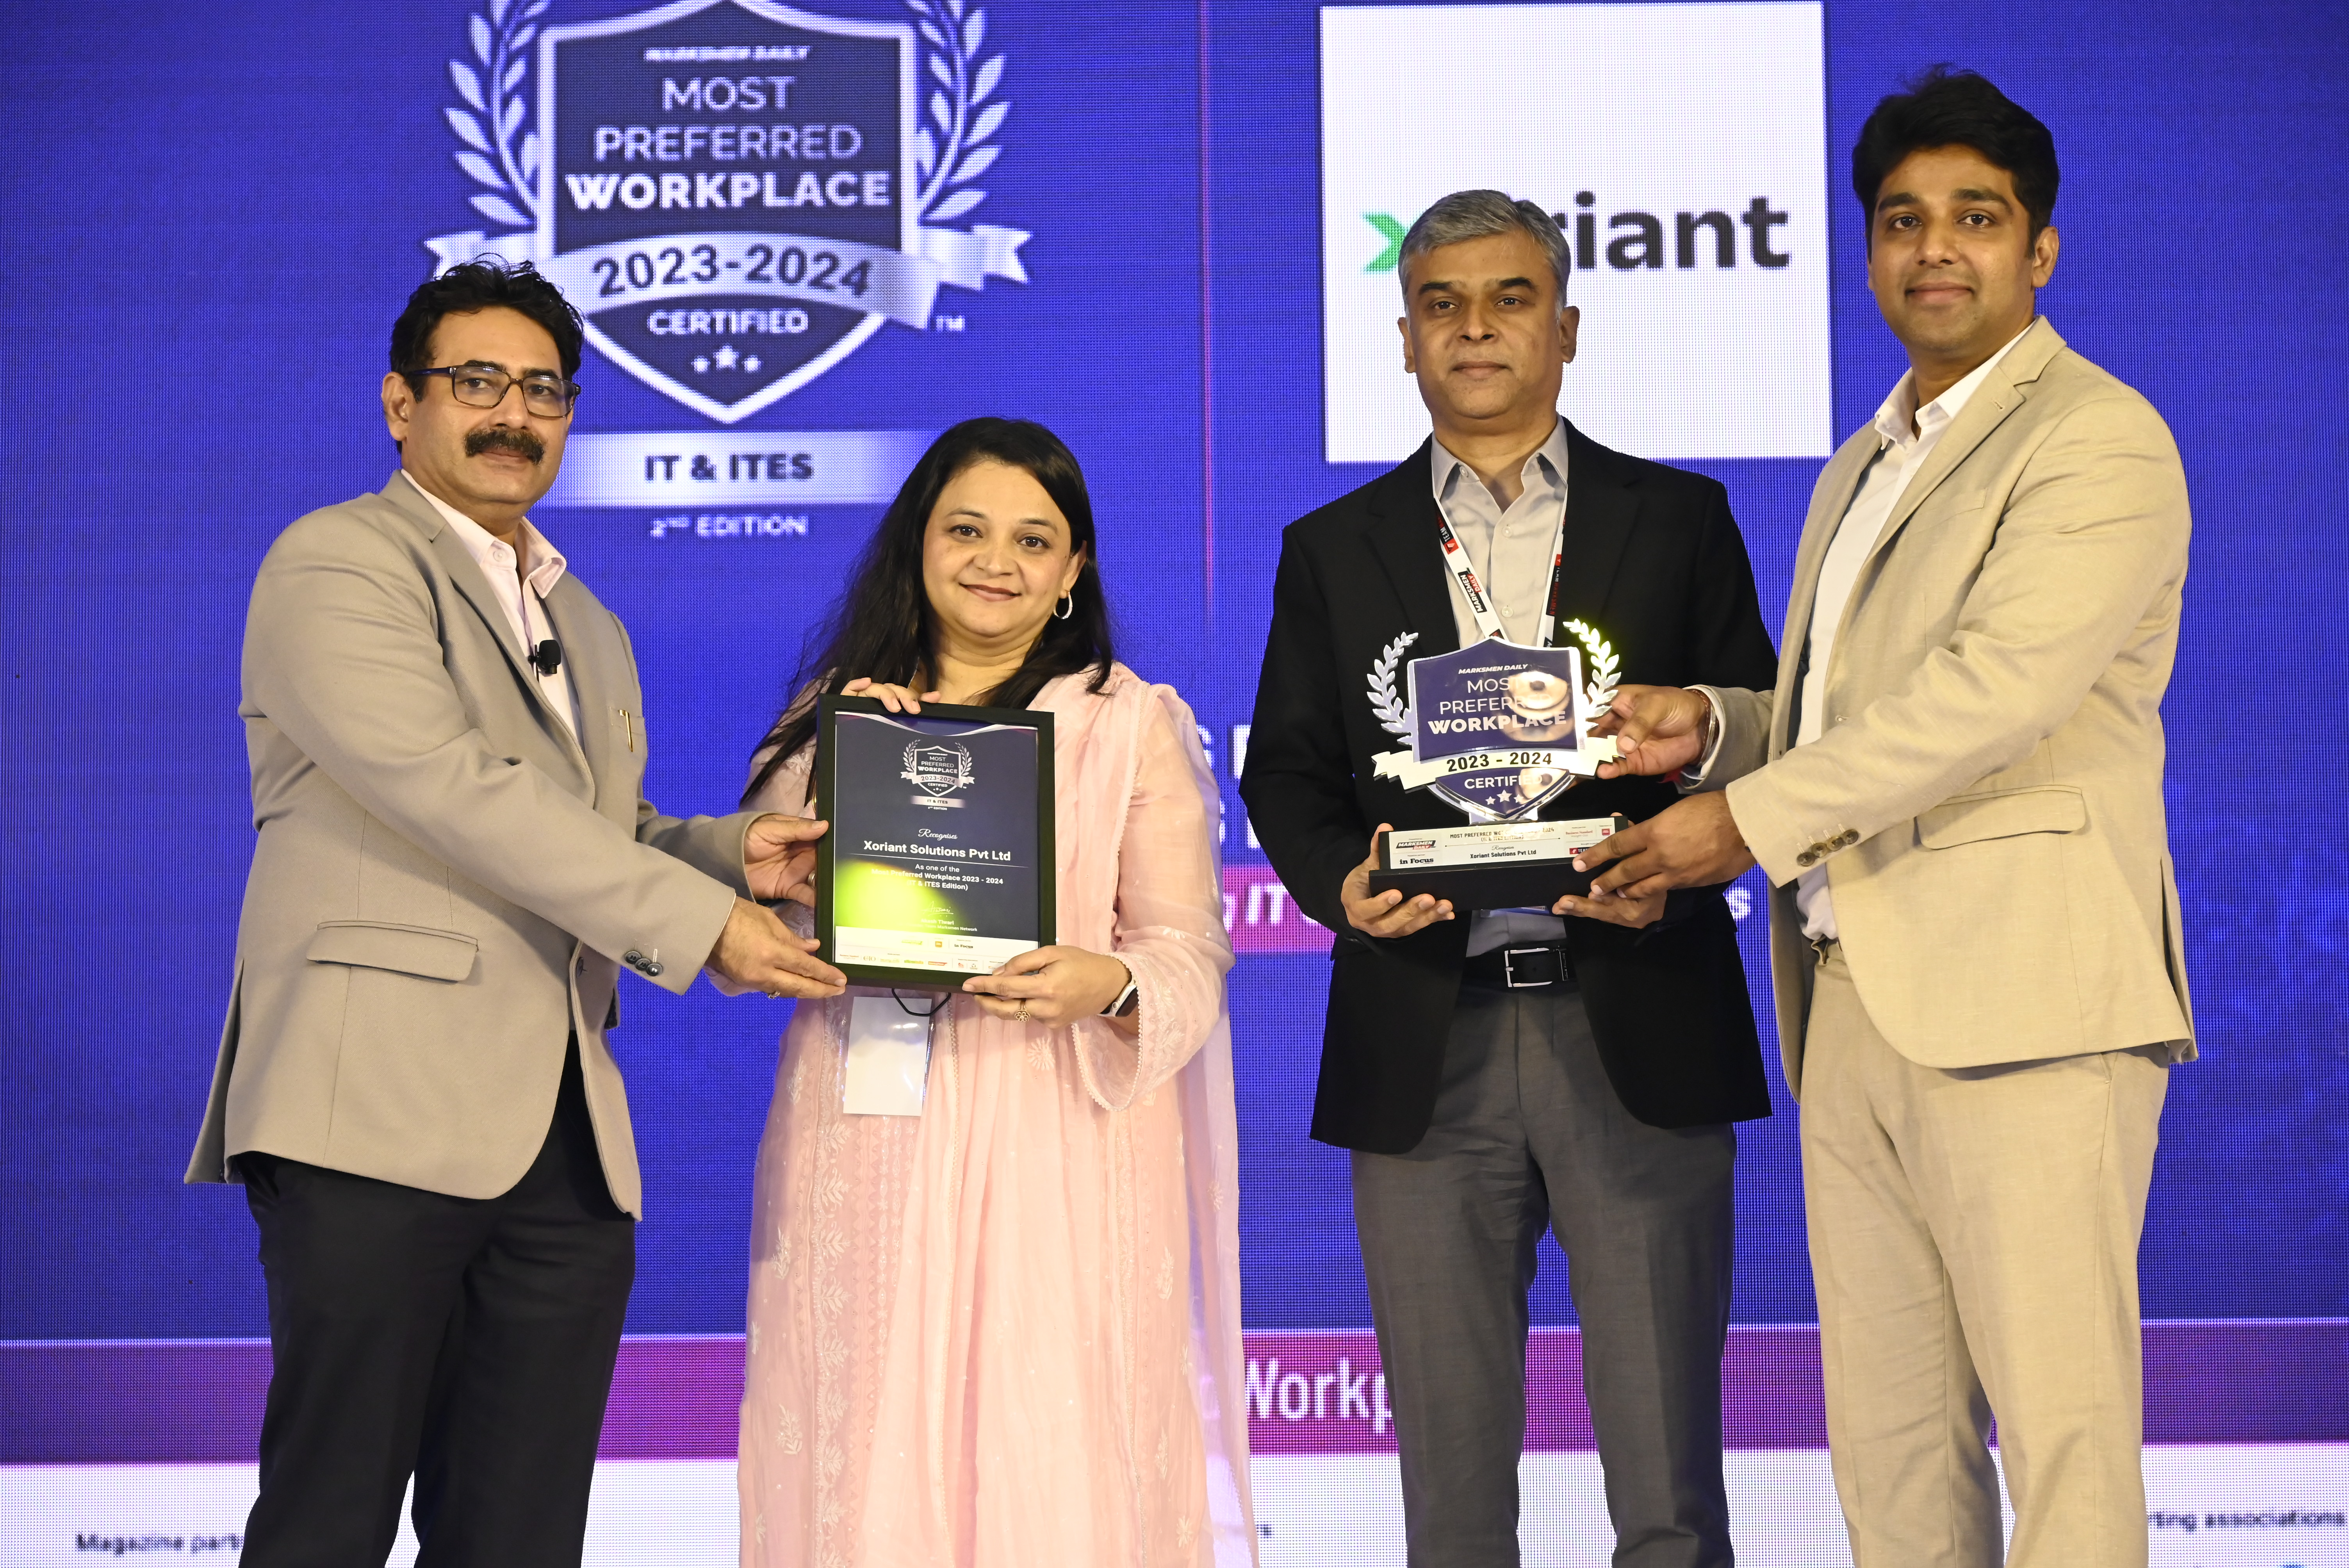 Xoriant is the “Most Preferred Workplace in the IT/ITES 2023-2024”